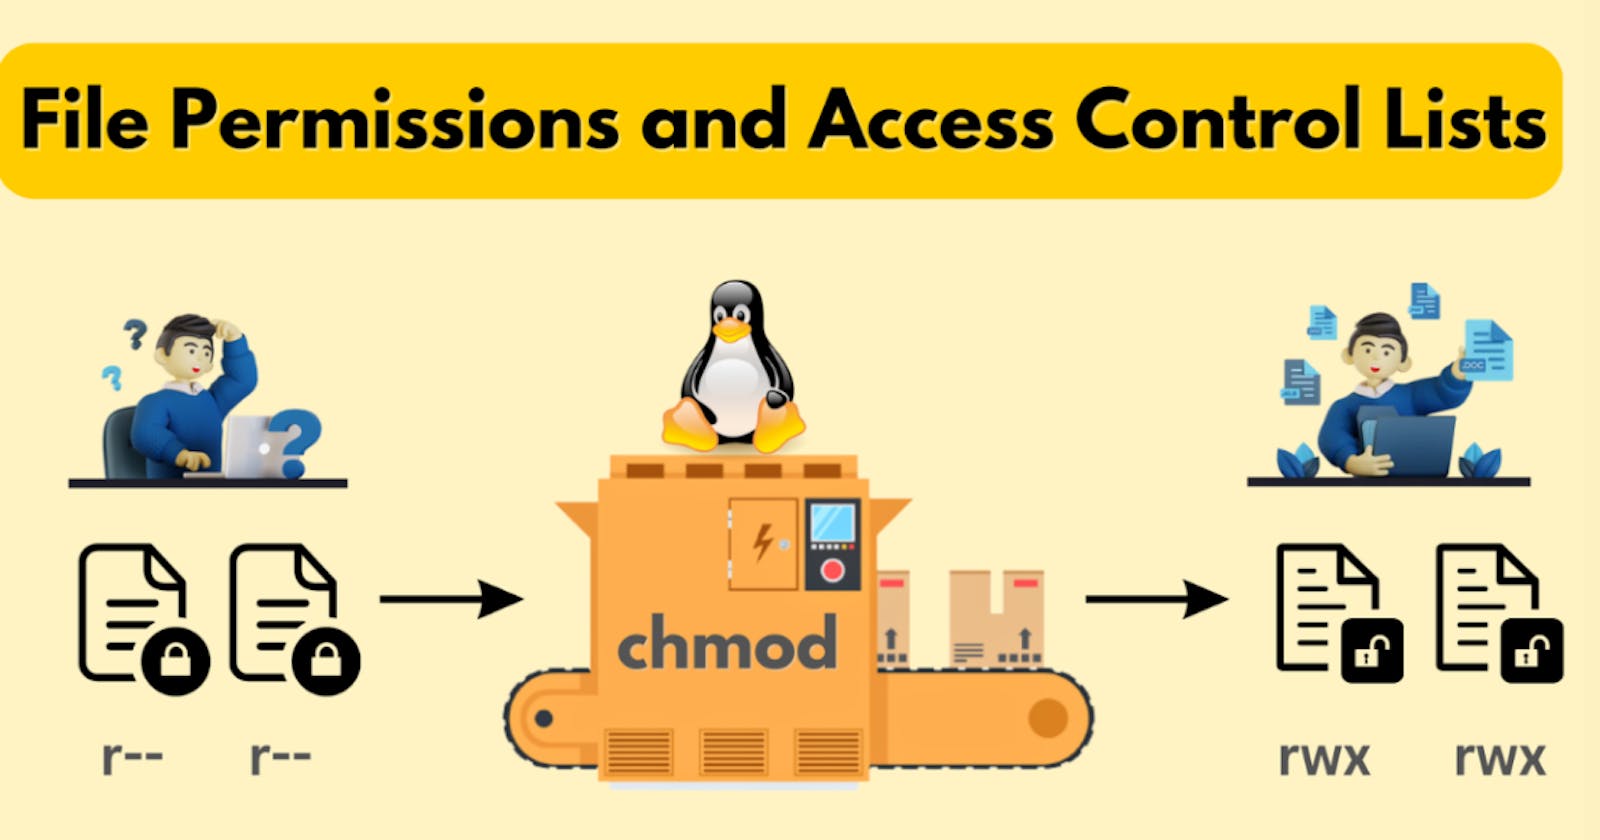 6 . Linux File Permissions and Access Control Lists